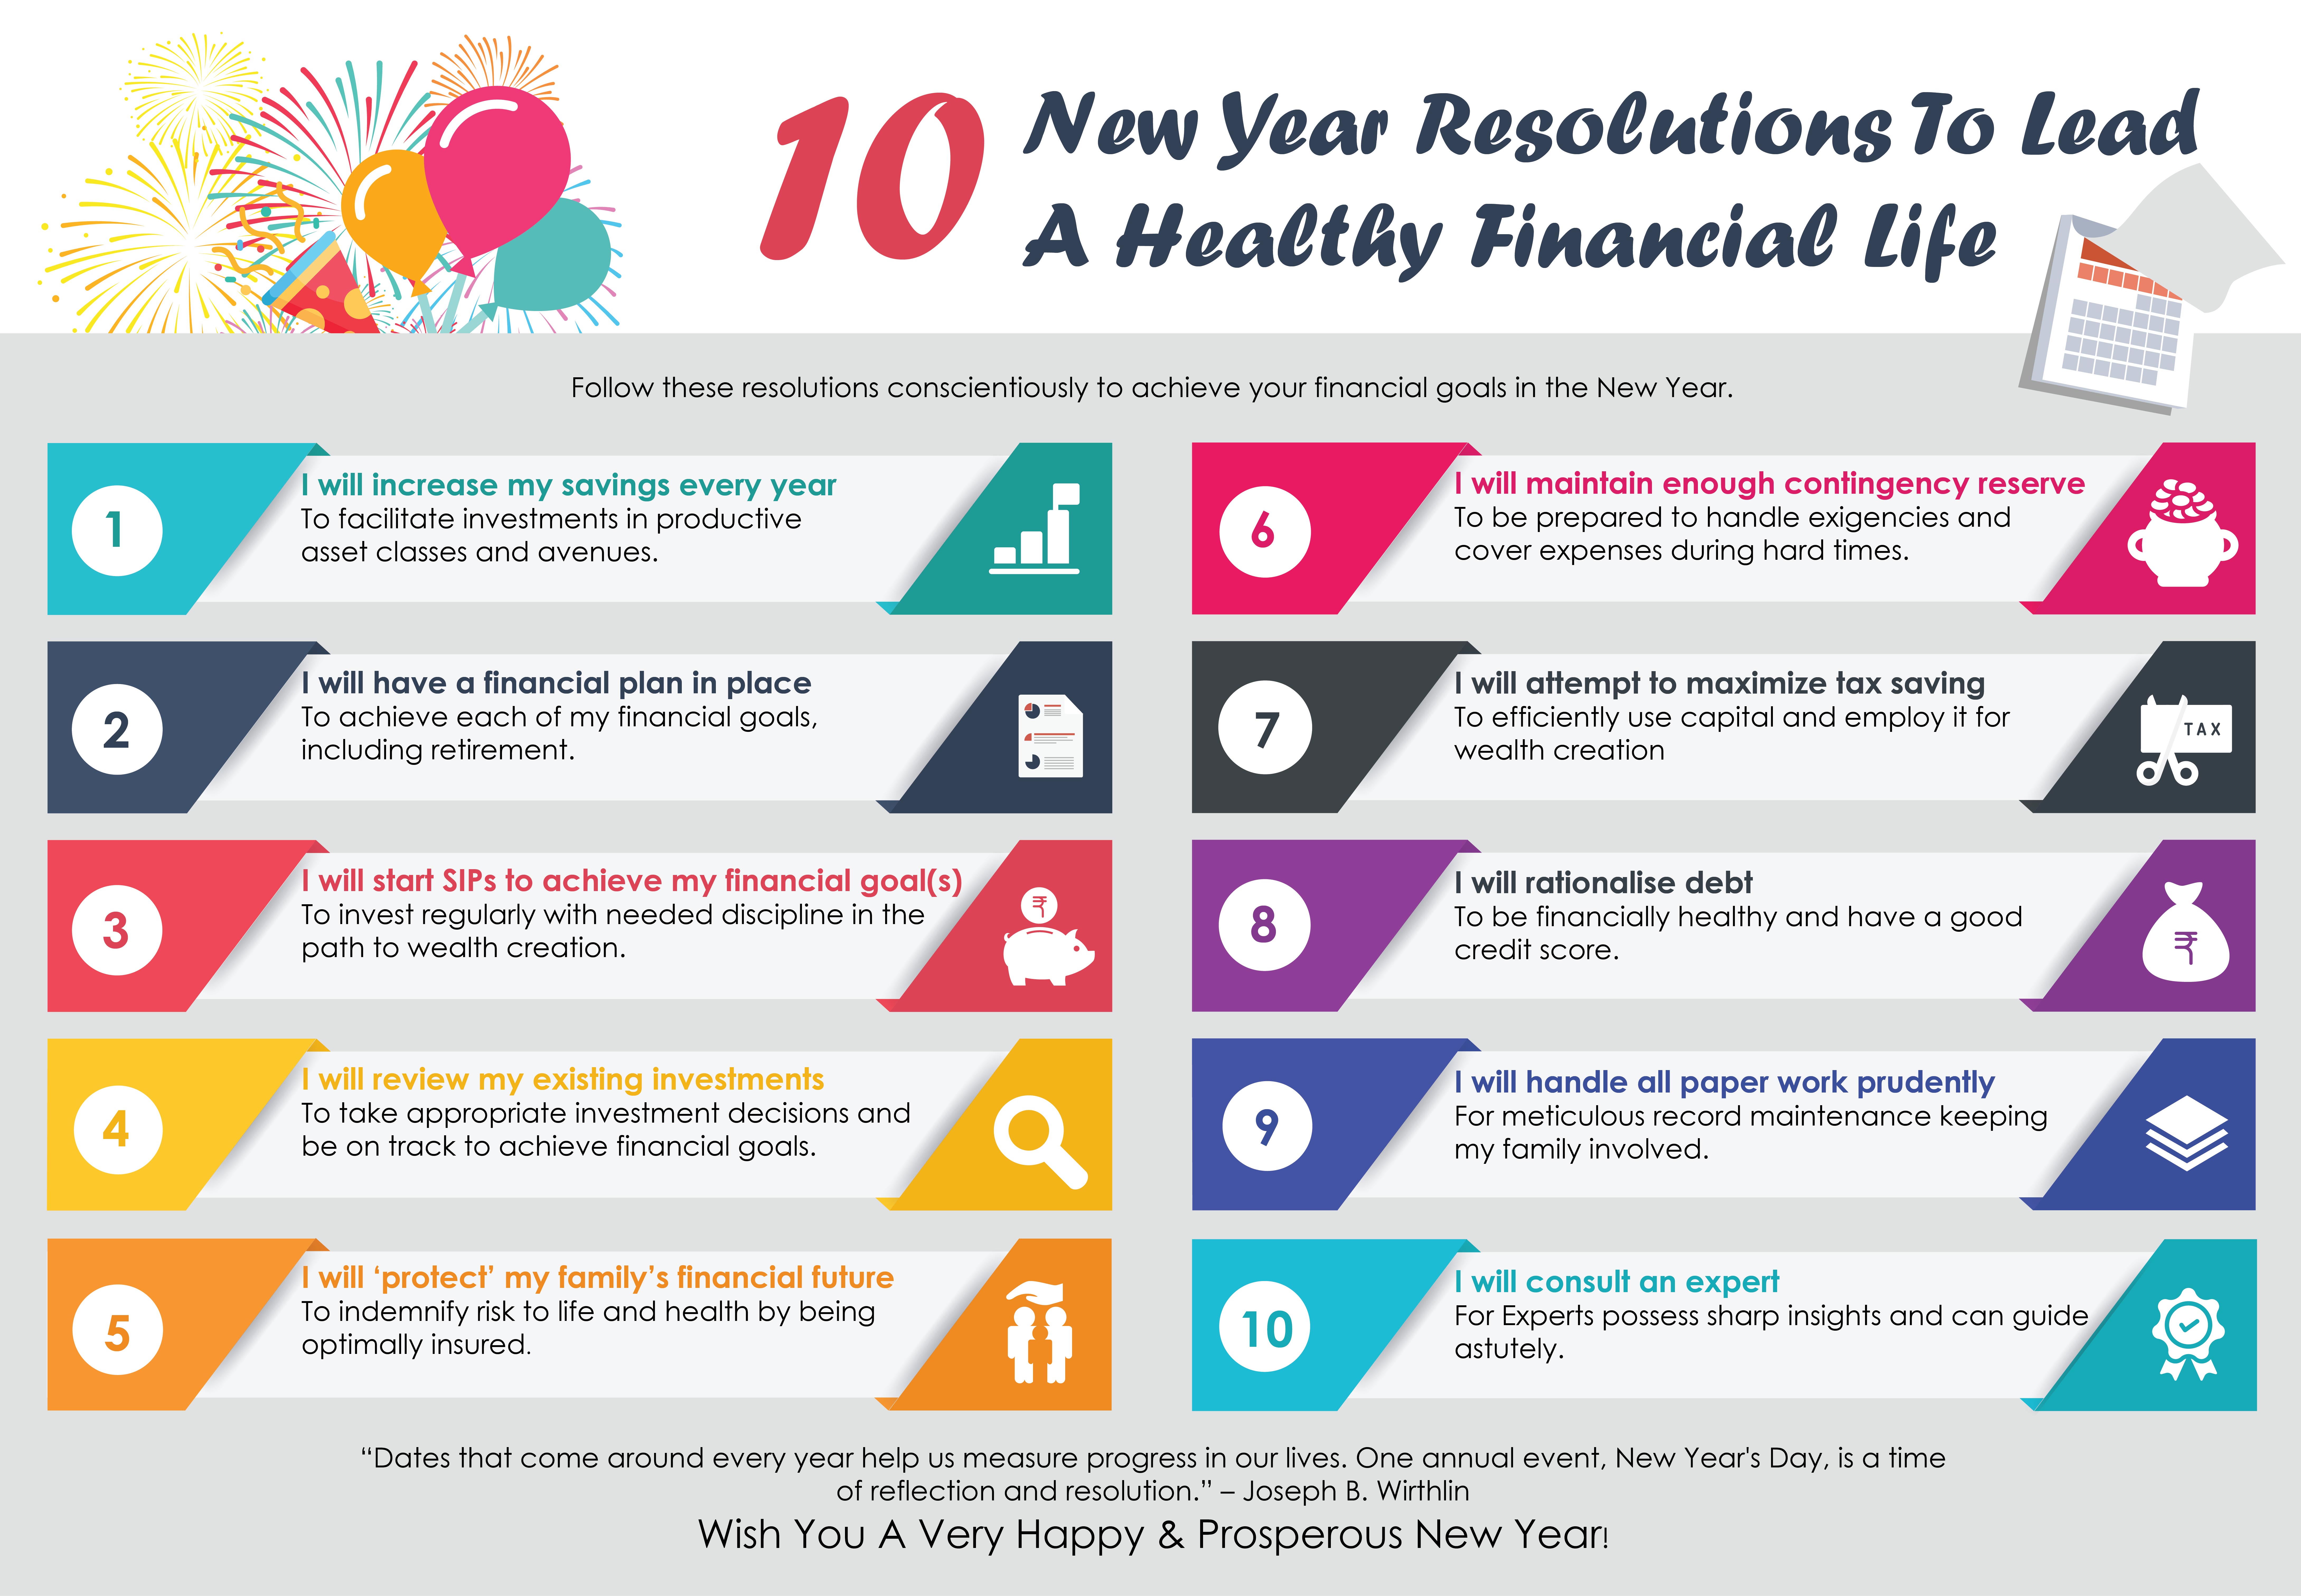 10 New Year Resolutions To Lead A Healthy Financial Life 